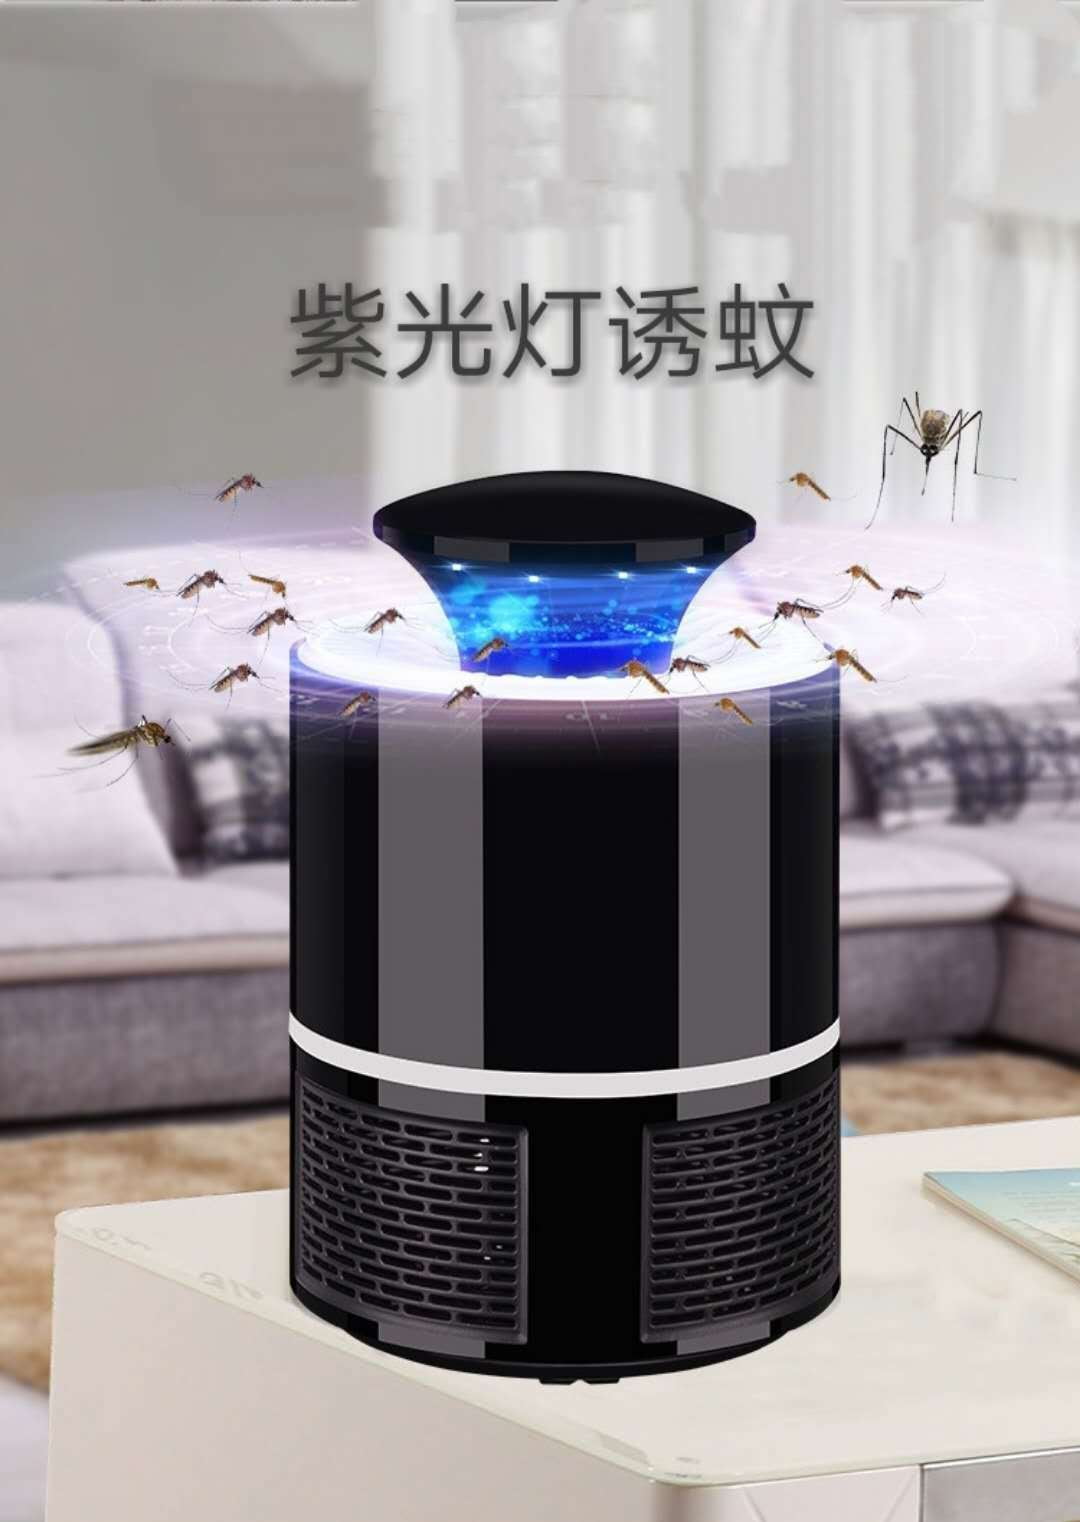 Details about   USB Photocatalytic Mosquito Killer Home Mosquito Repellent LED Mosquito Trap New 